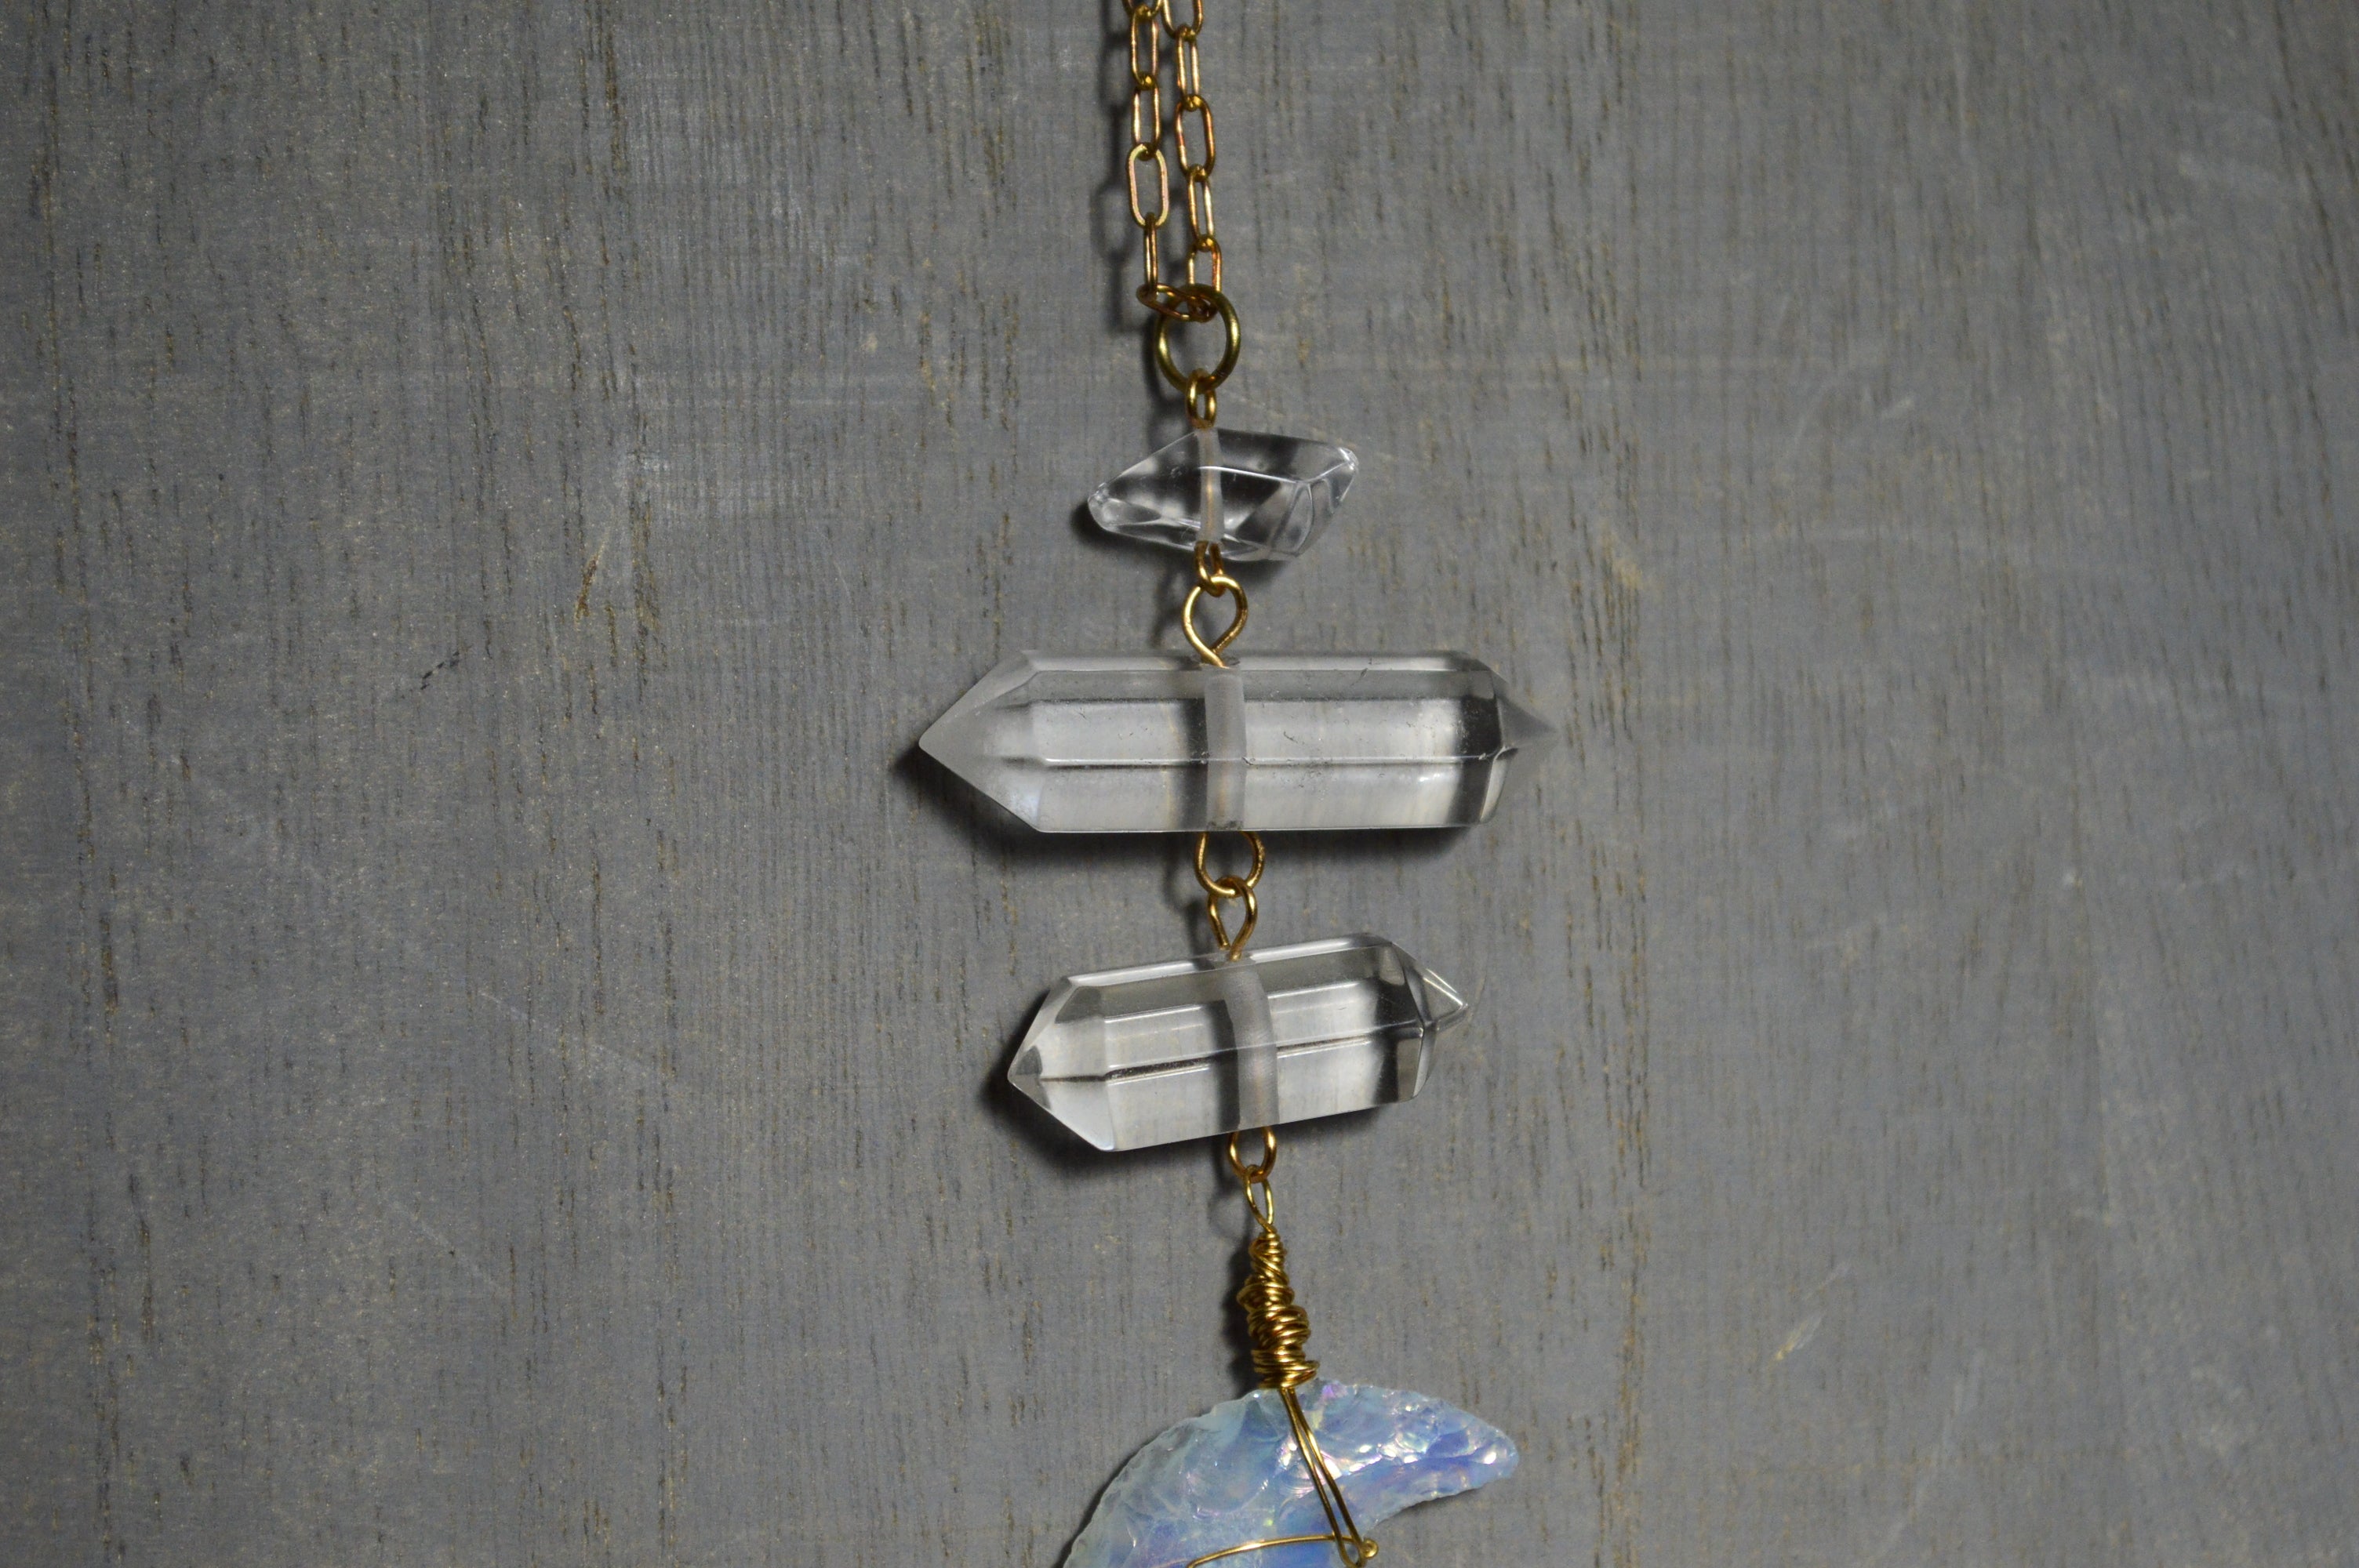 Planets Aligned - Opalite Waning Crescent Moon Brass Necklace